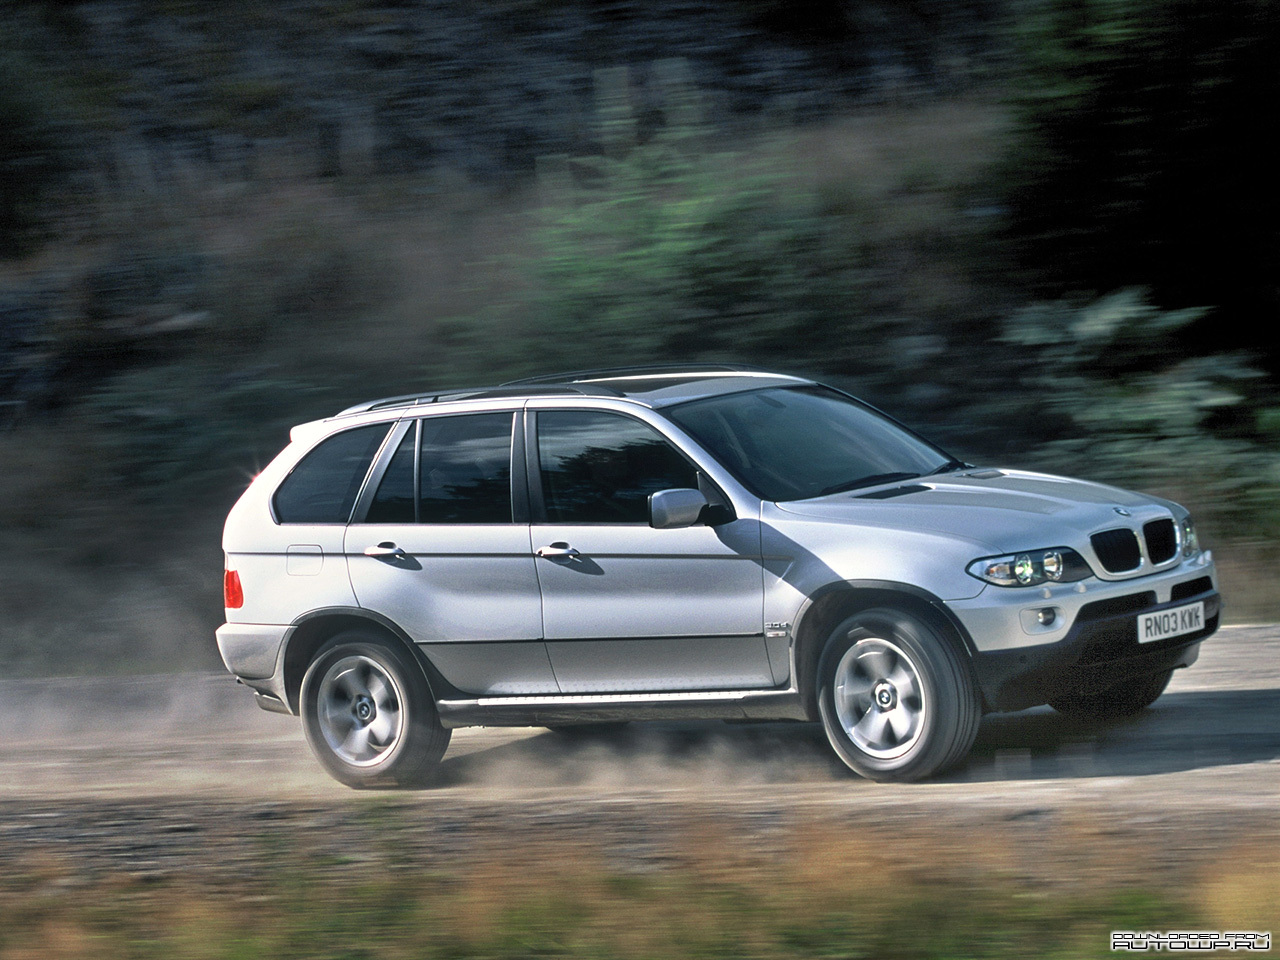 BMW X5 E53 photos PhotoGallery with 77 pics